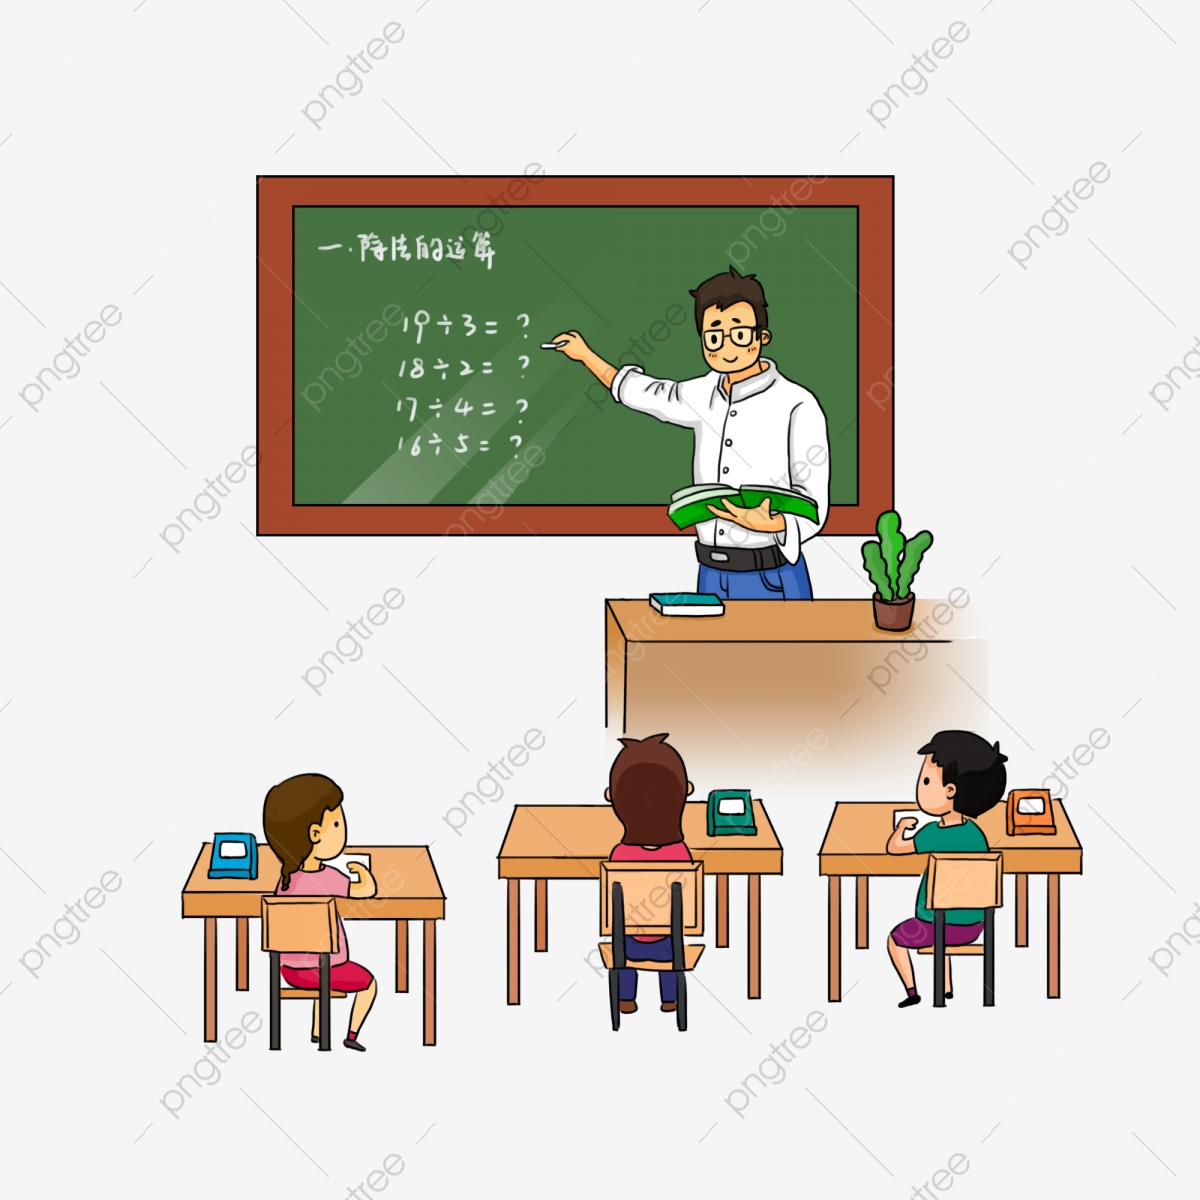 learning clipart class student